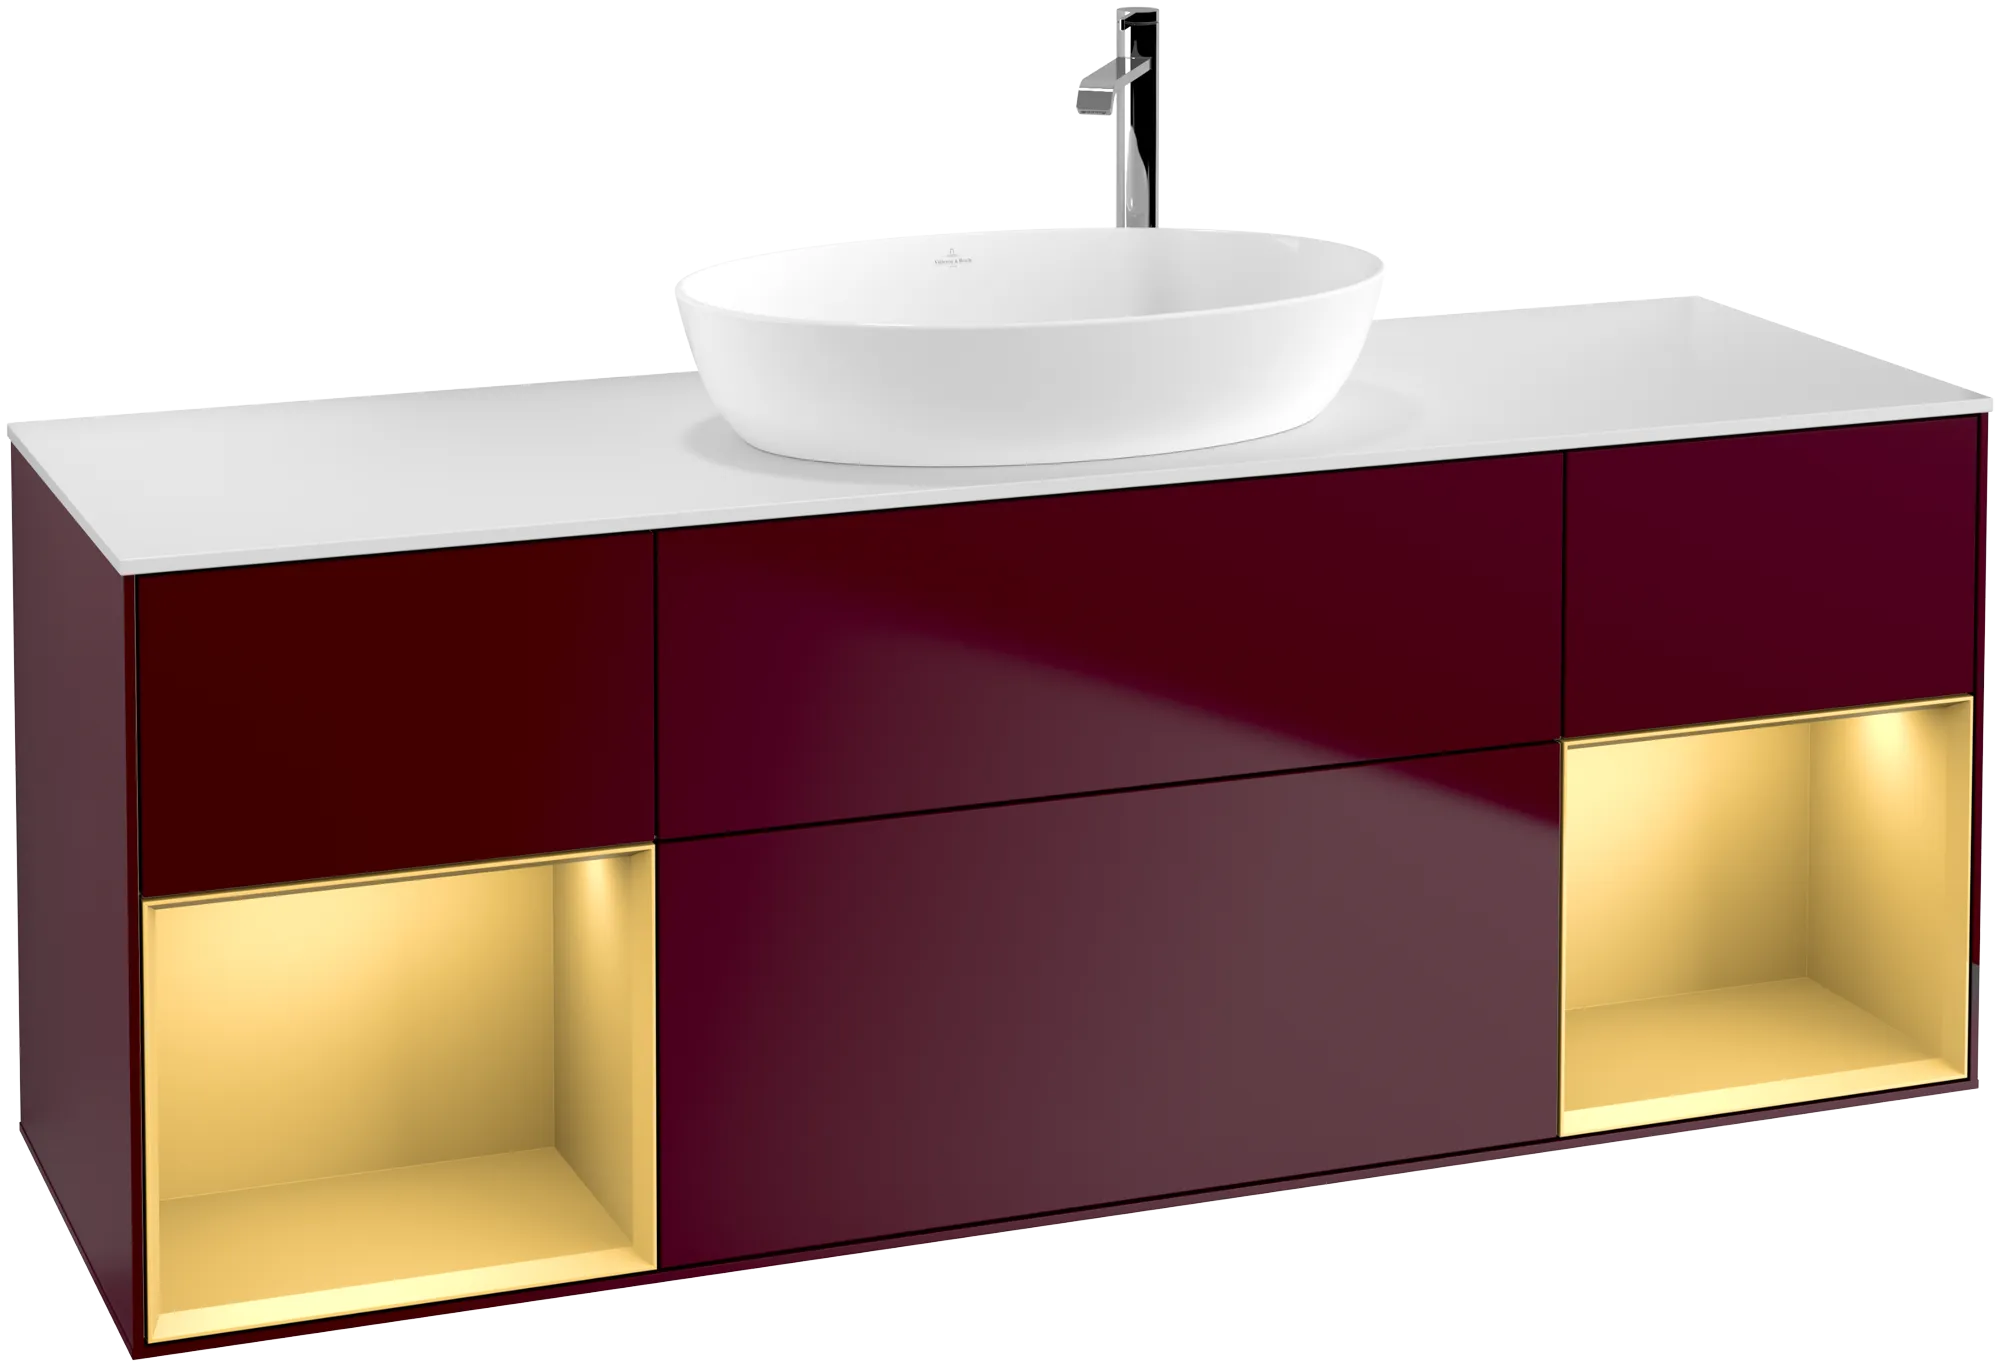 Picture of VILLEROY BOCH Finion Vanity unit, with lighting, 4 pull-out compartments, 1600 x 603 x 501 mm, Peony Matt Lacquer / Gold Matt Lacquer / Glass White Matt #G981HFHB